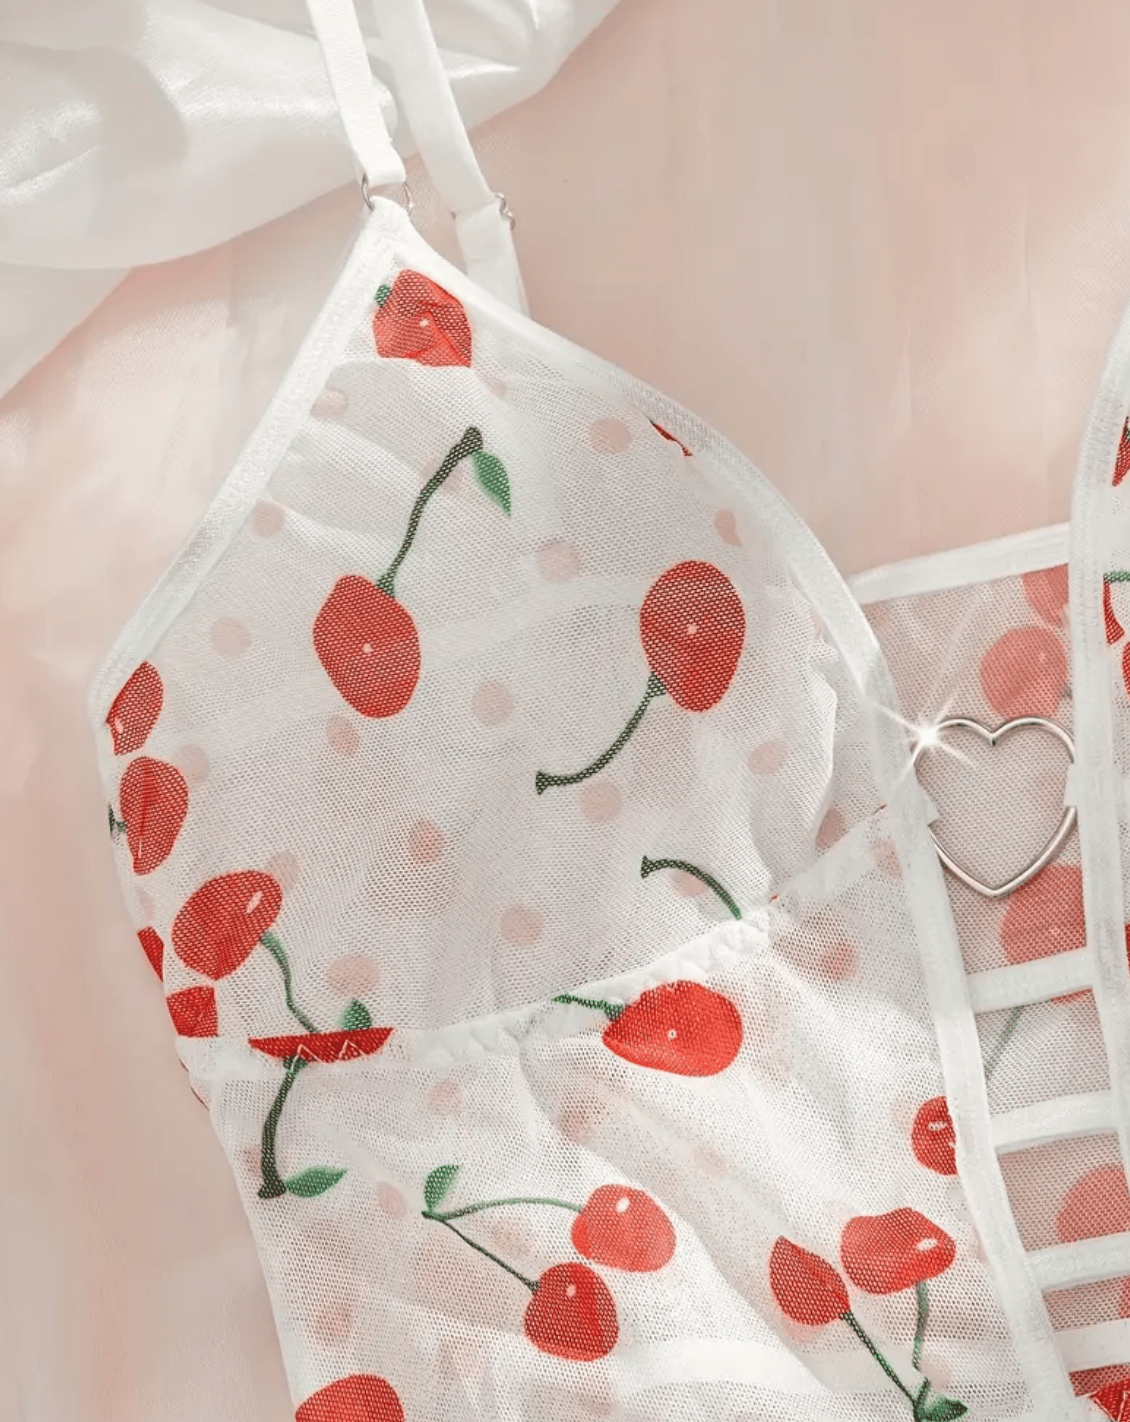 white lace negligees cherry pattern